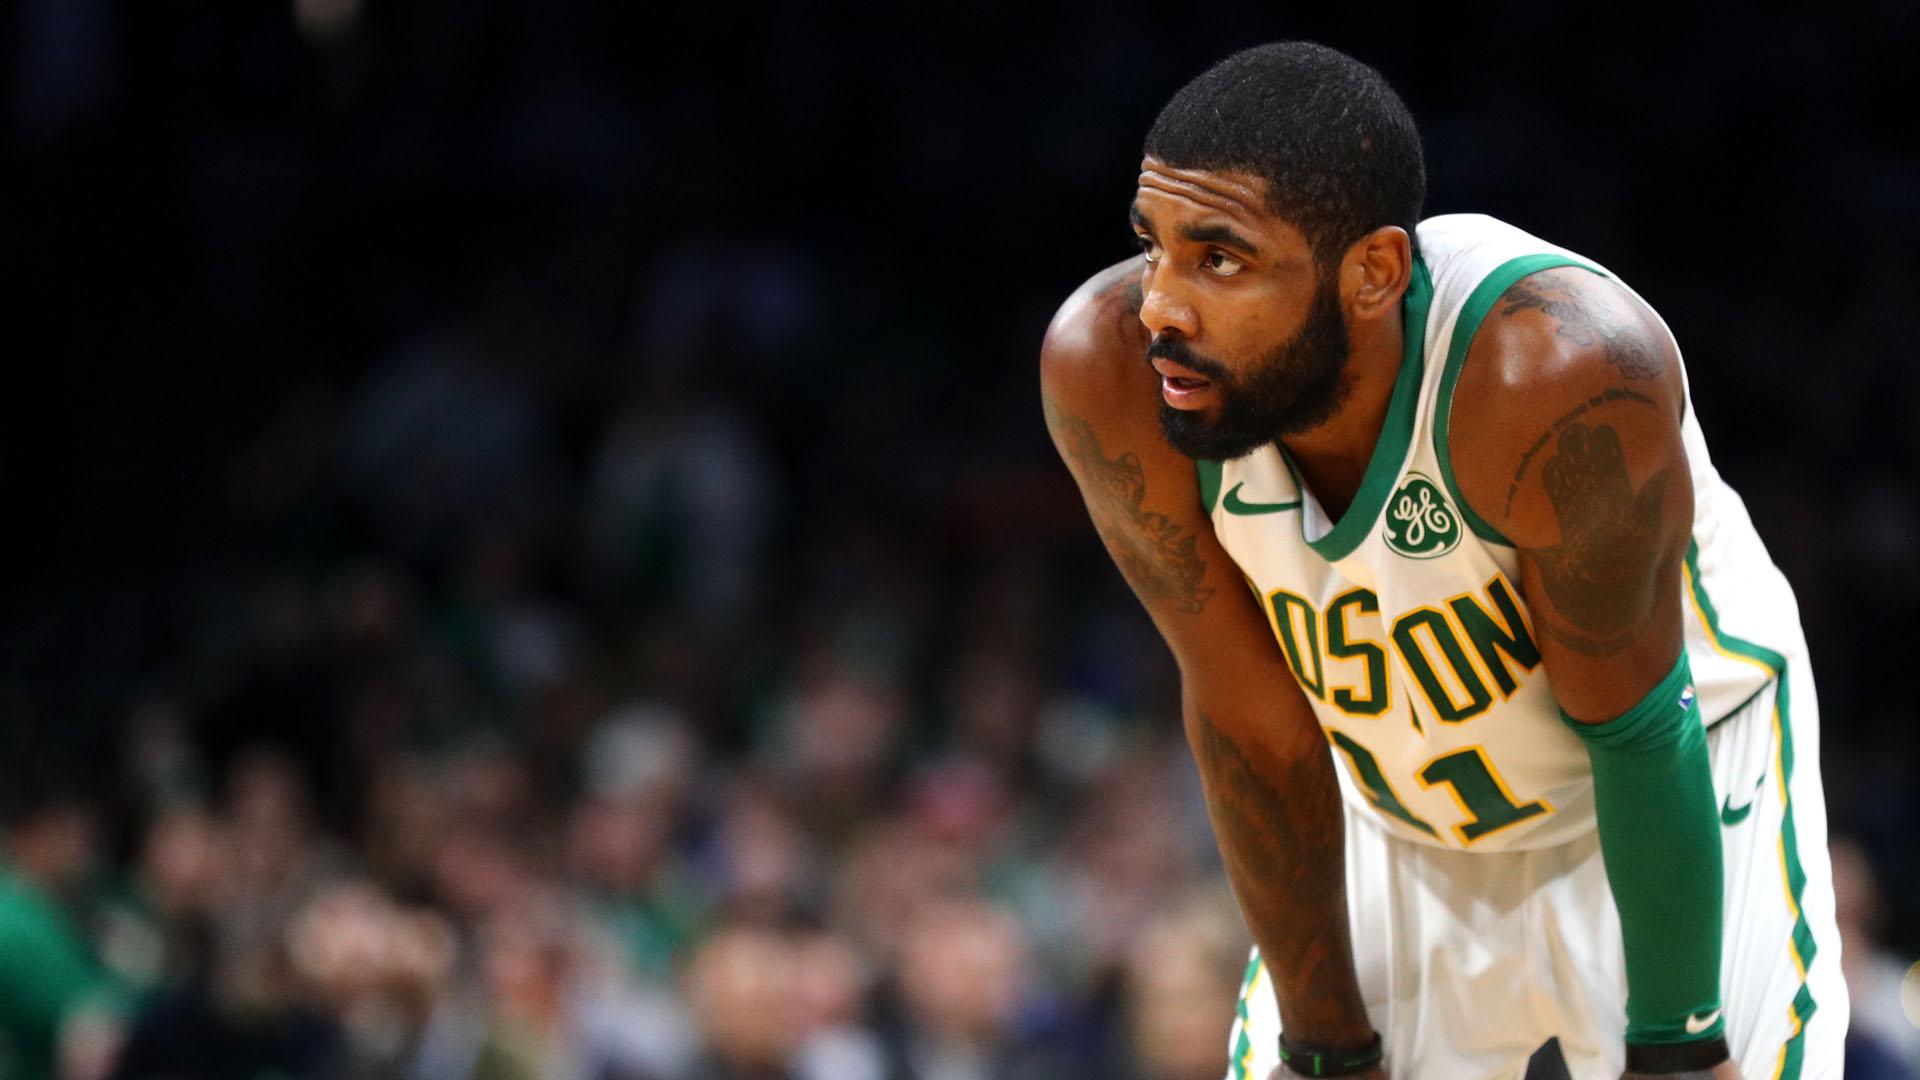 Kyrie Irving called LeBron James this week to apologize. BASKETBALL